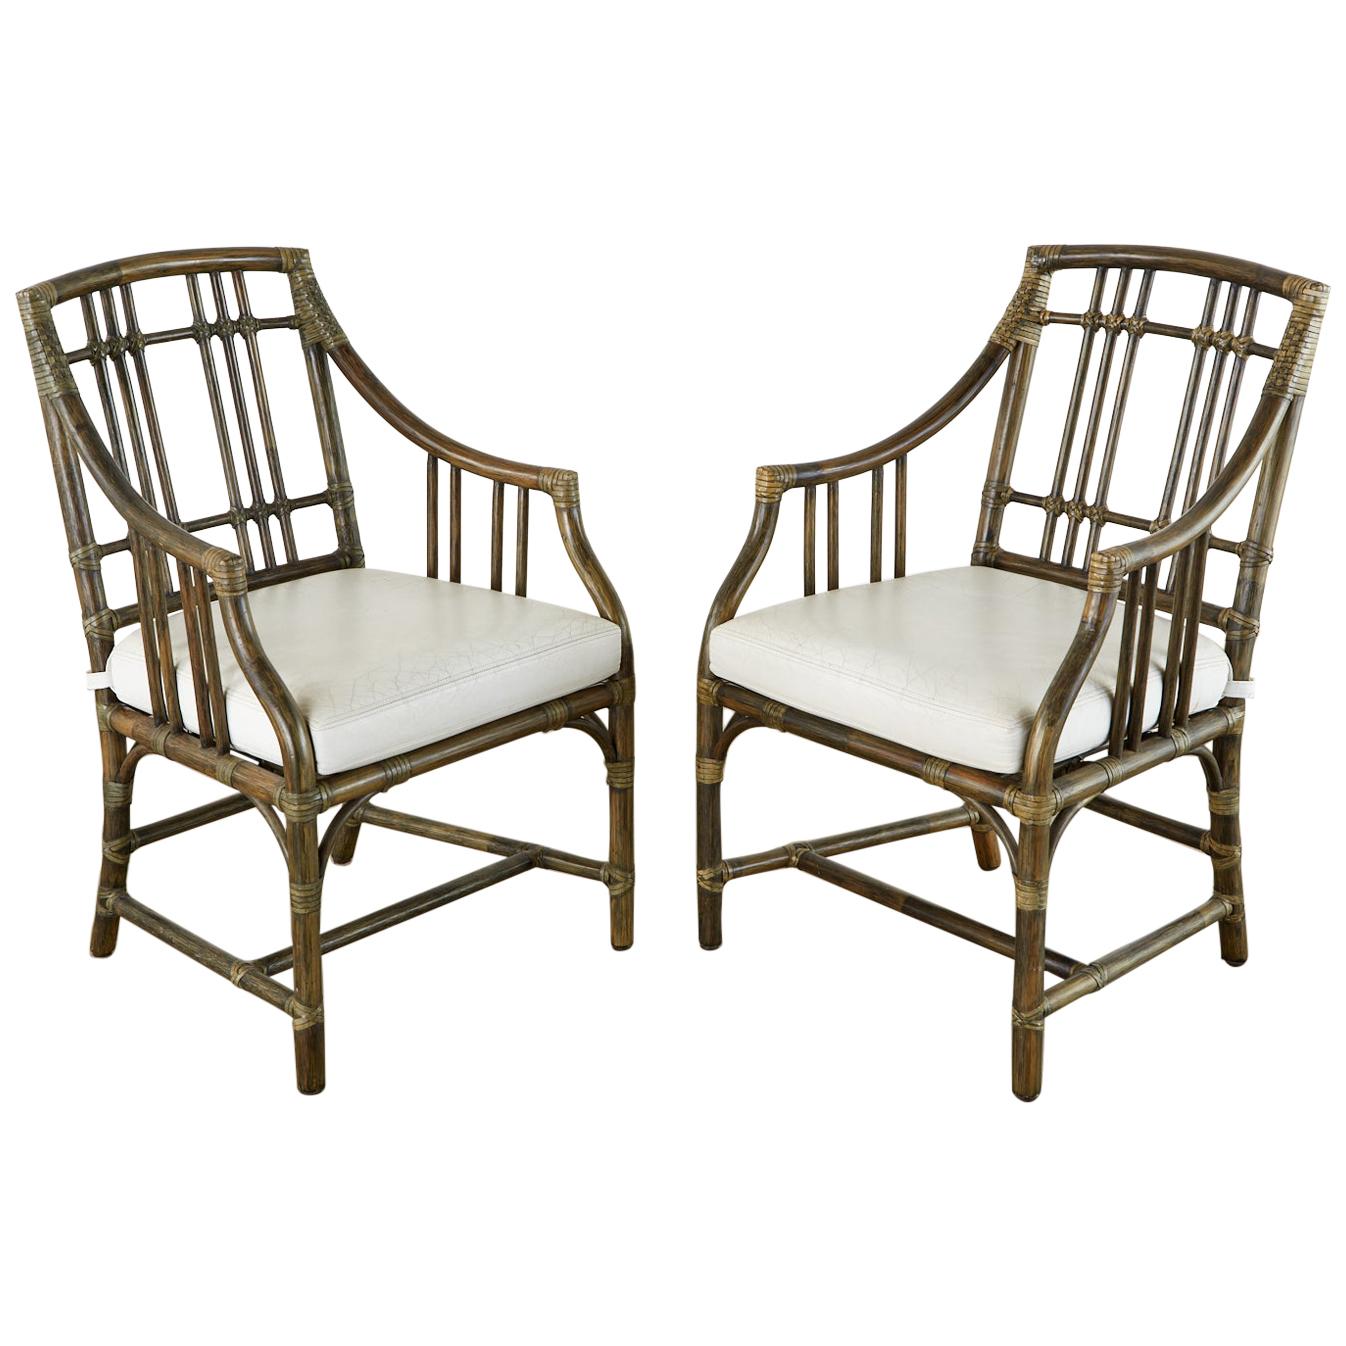 Pair of McGuire Balboa Rattan Armchairs or Dining Chairs